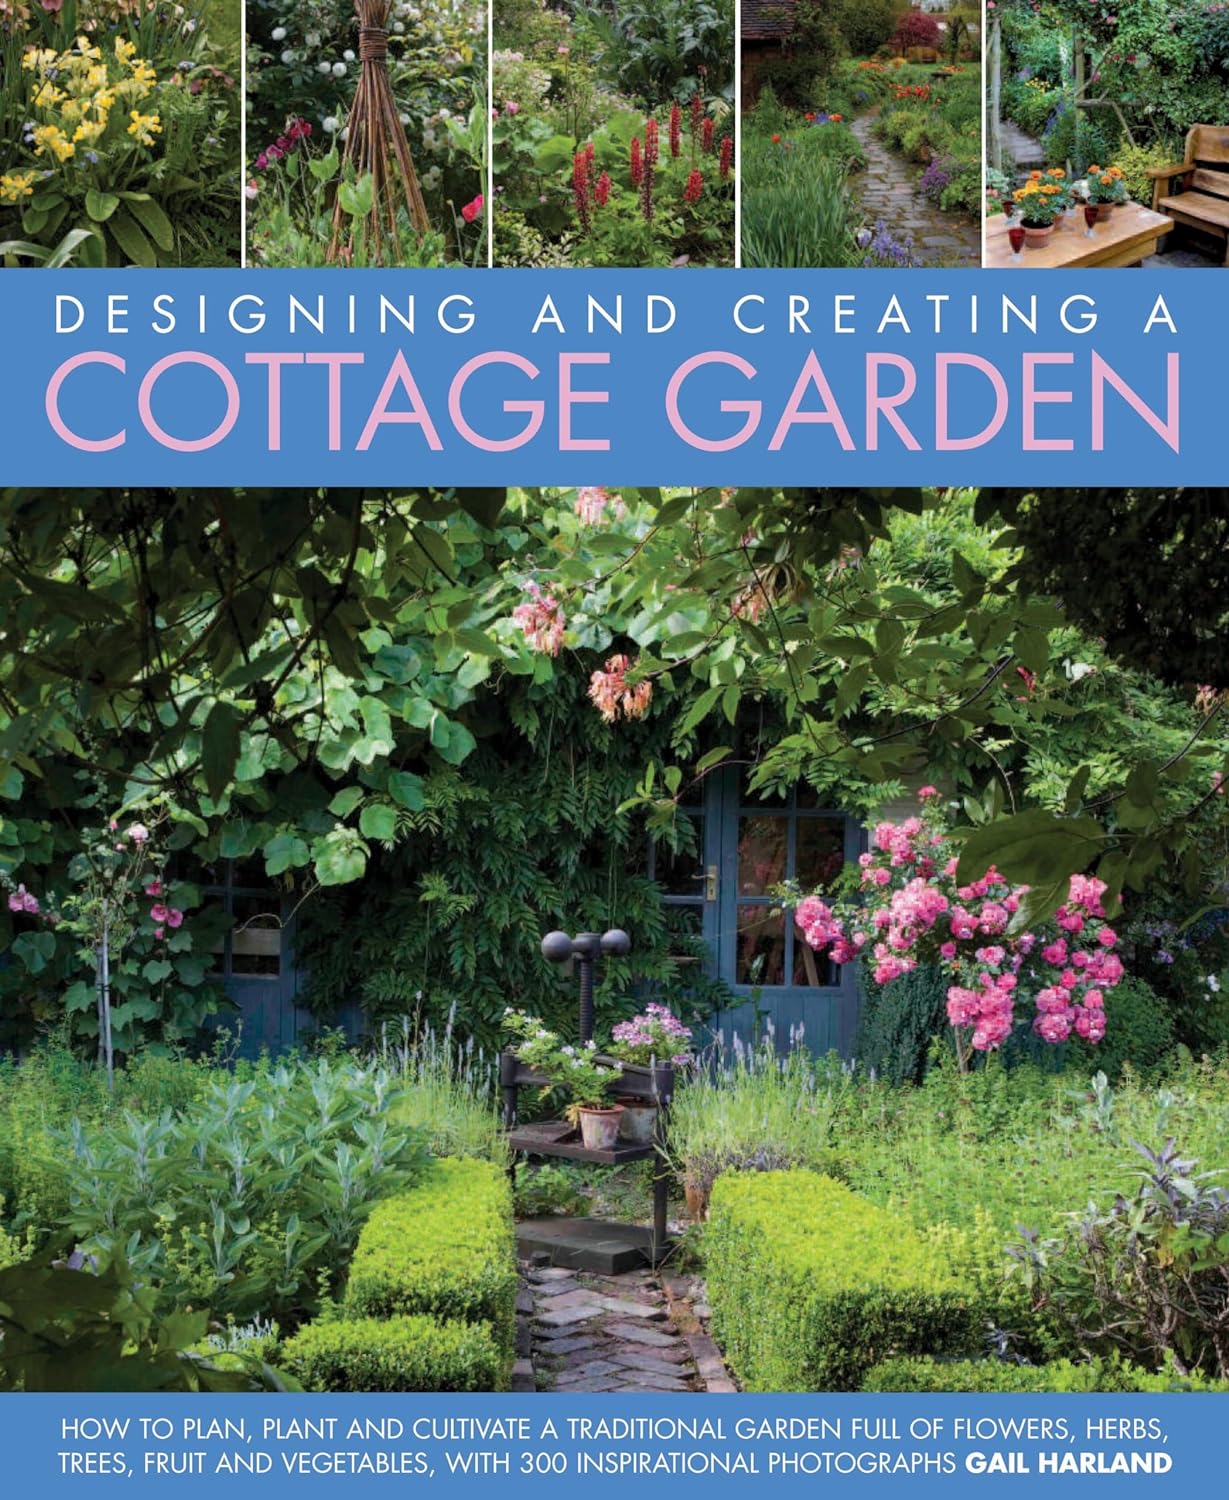 Designing and Creating a Cottage Garden book 